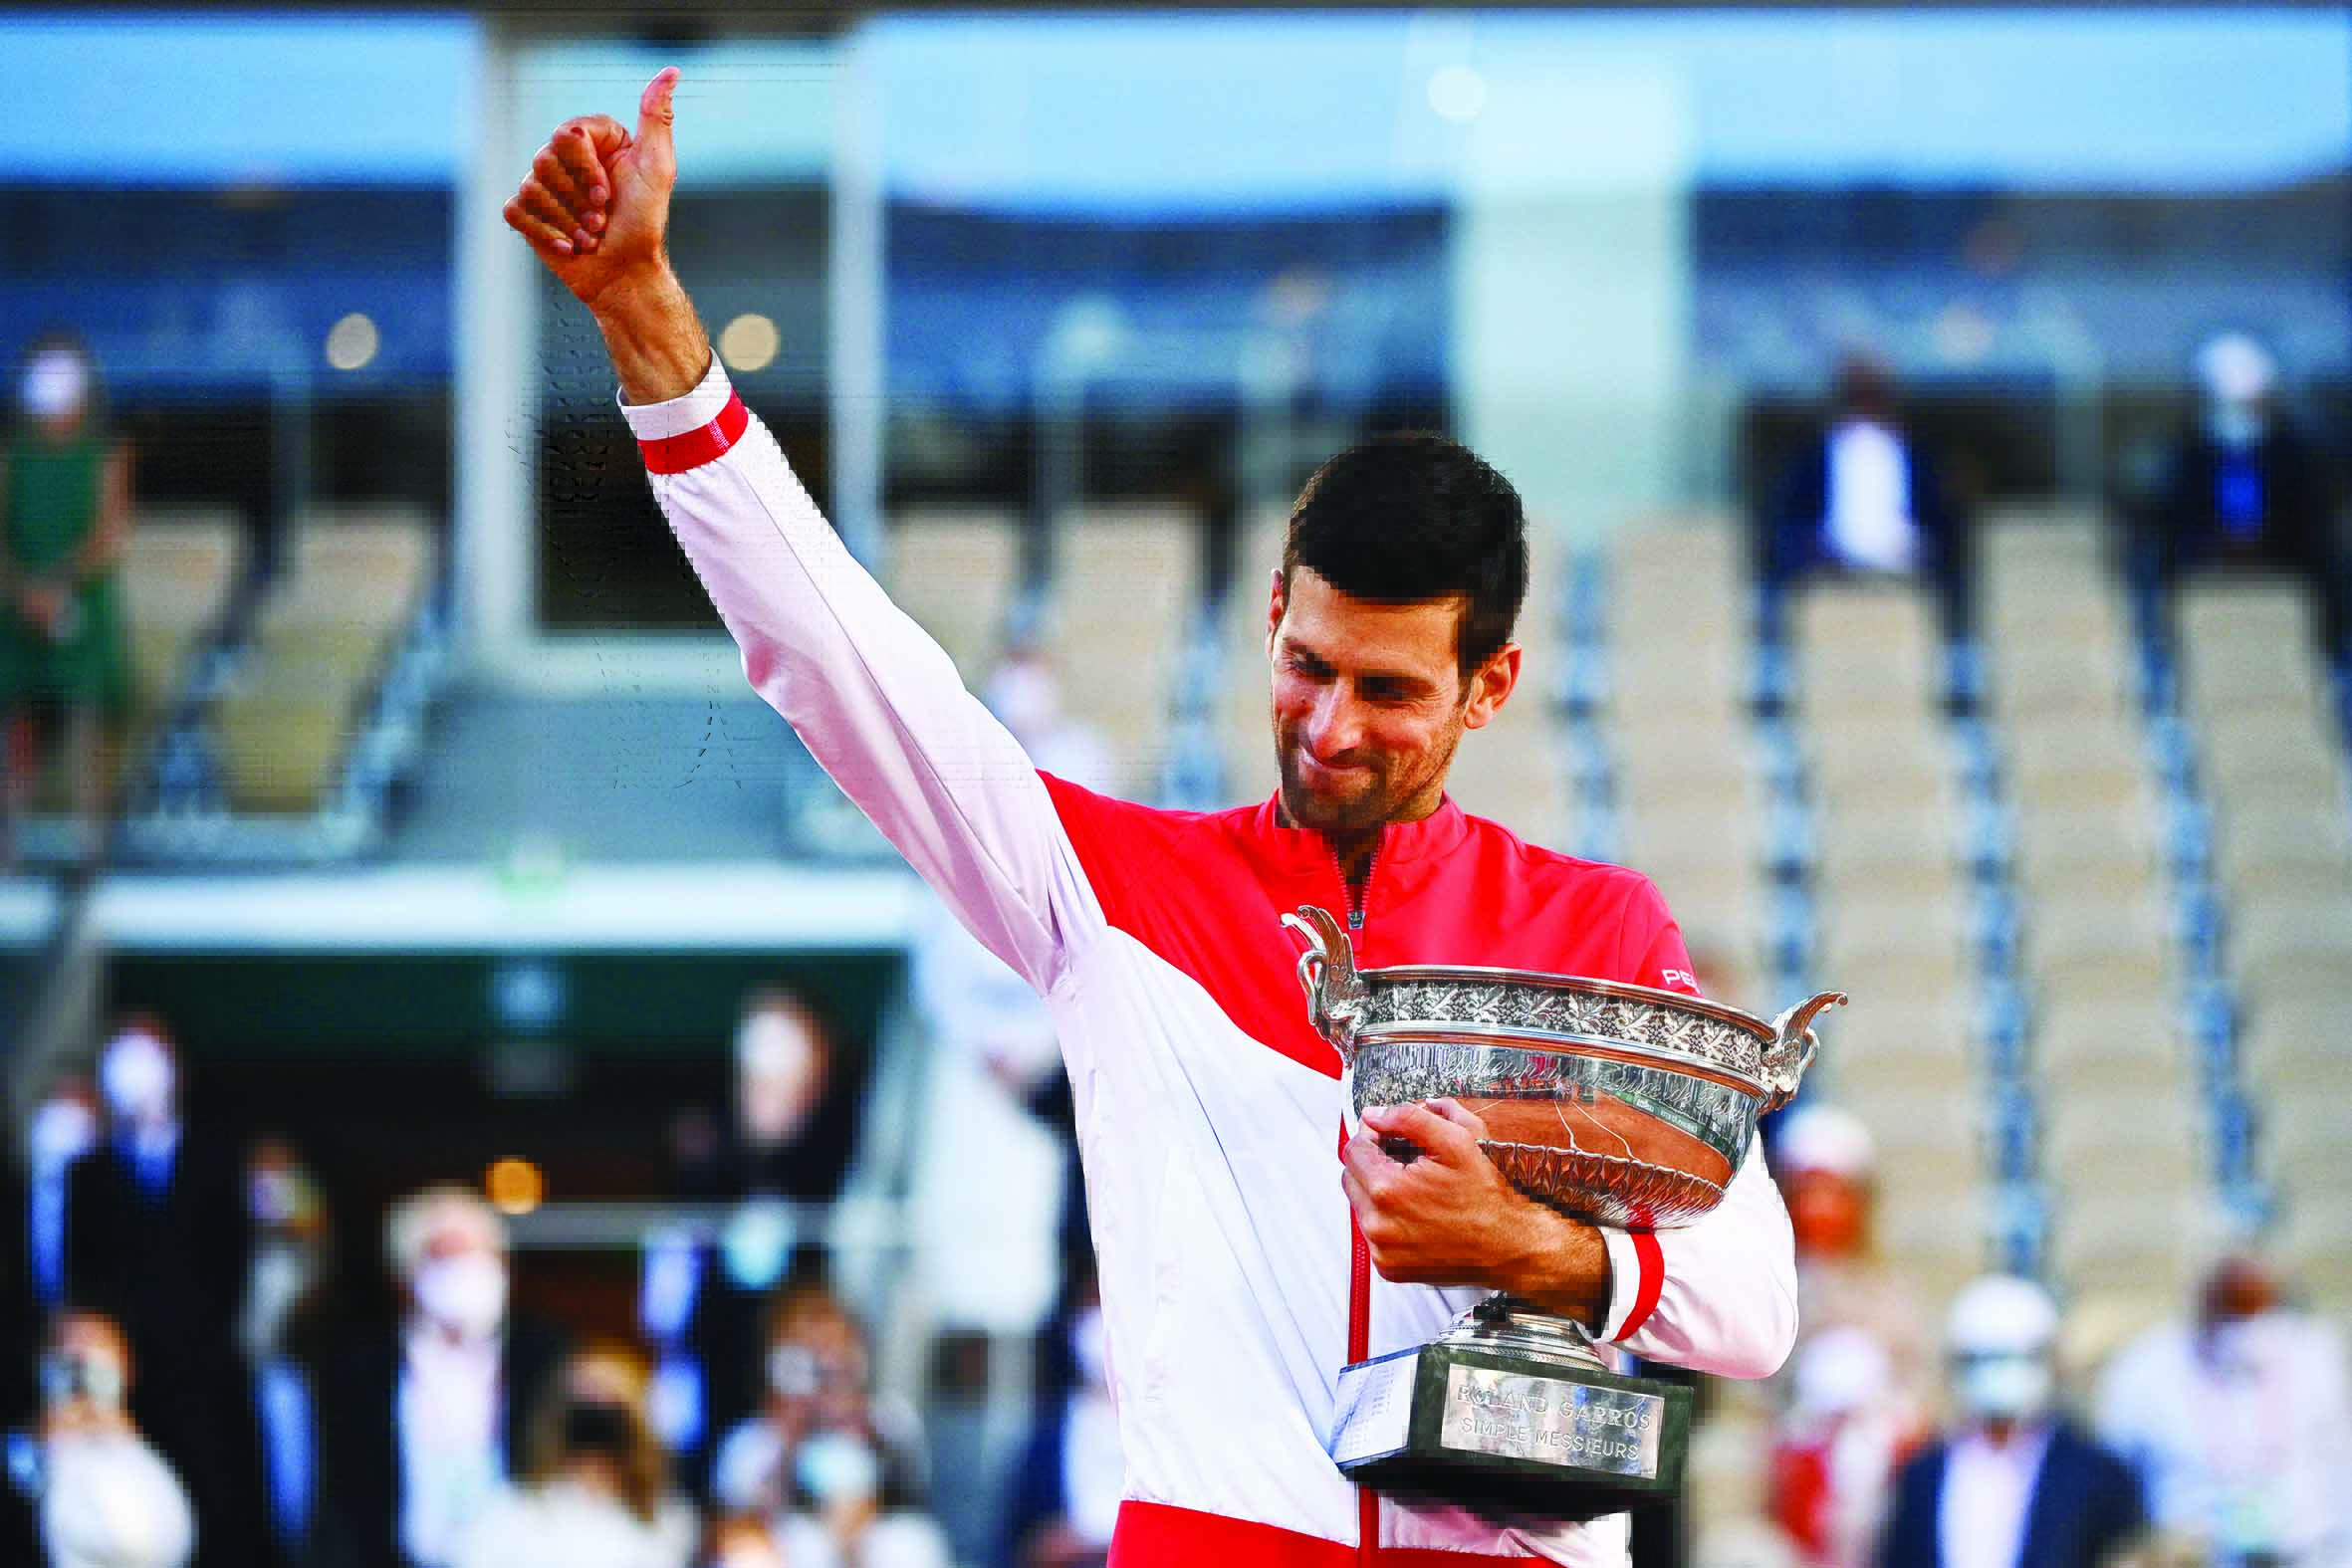 PARIS: Serbia's Novak Djokovic poses with The Mousquetaires Cup (The Musketeers) after winning against Greece's Stefanos Tsitsipas at the end of their men's final match on Day 15 of The Roland Garros 2021 French Open tennis tournament yesterday. - AFP n